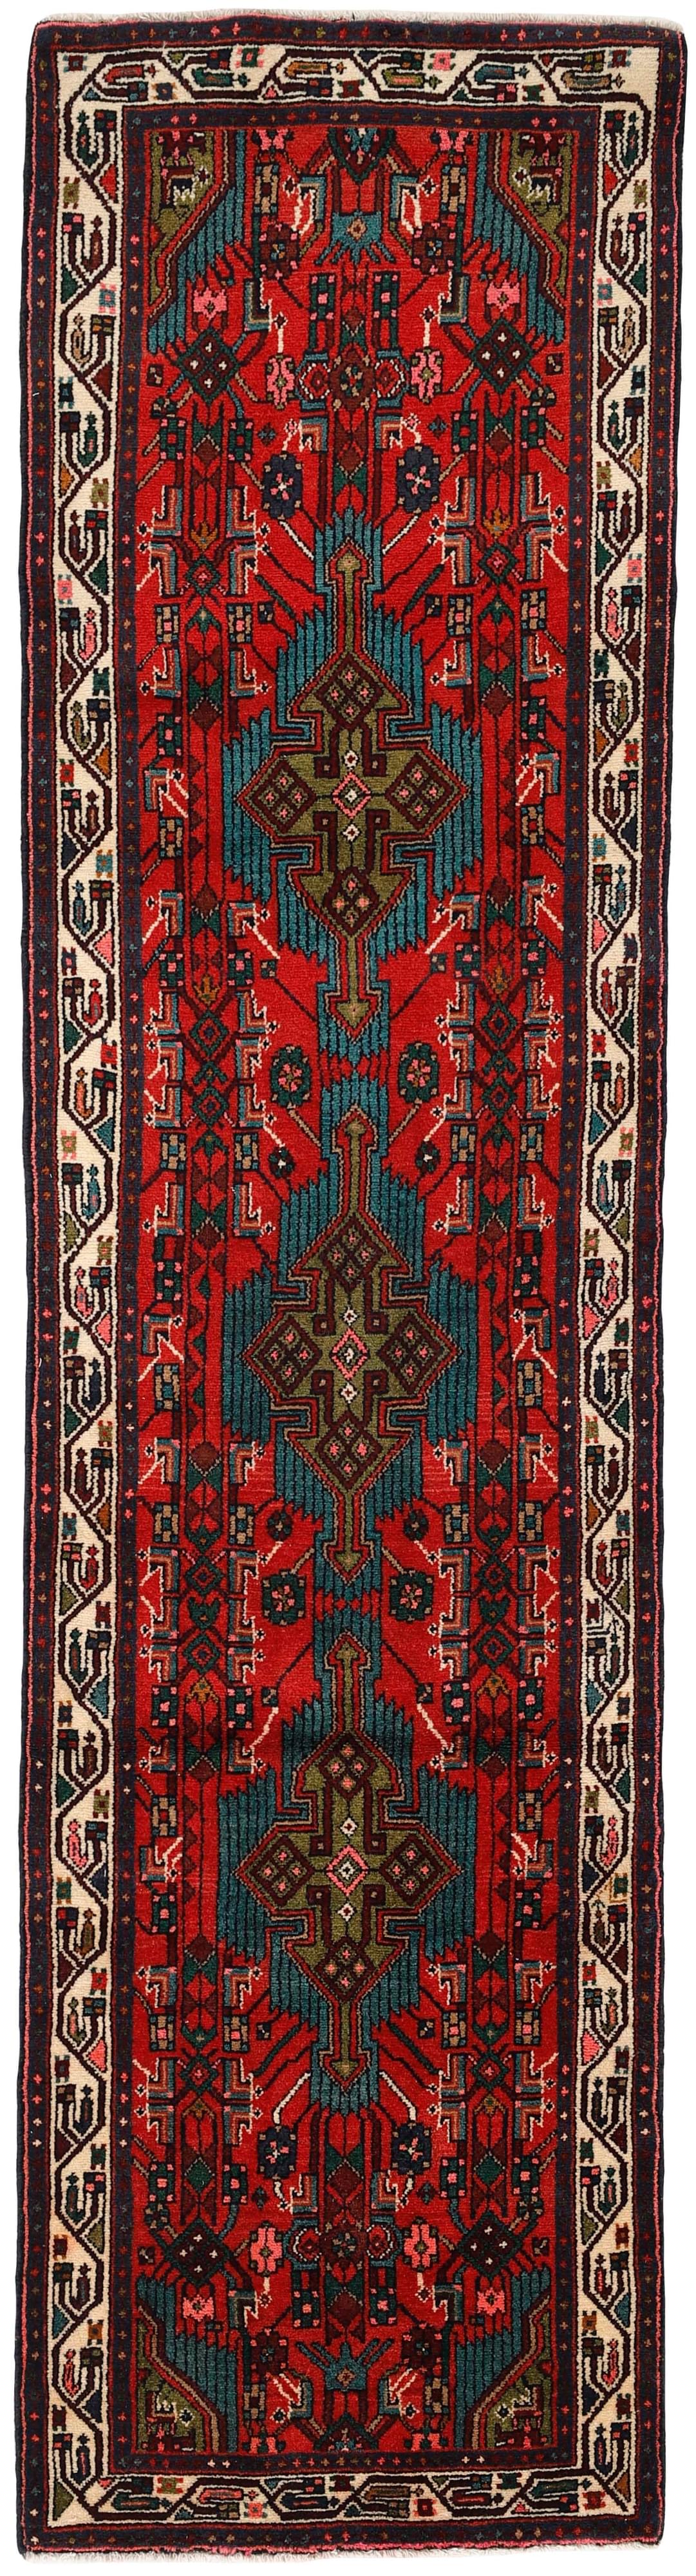 Red and black traditional persian runner with floral design